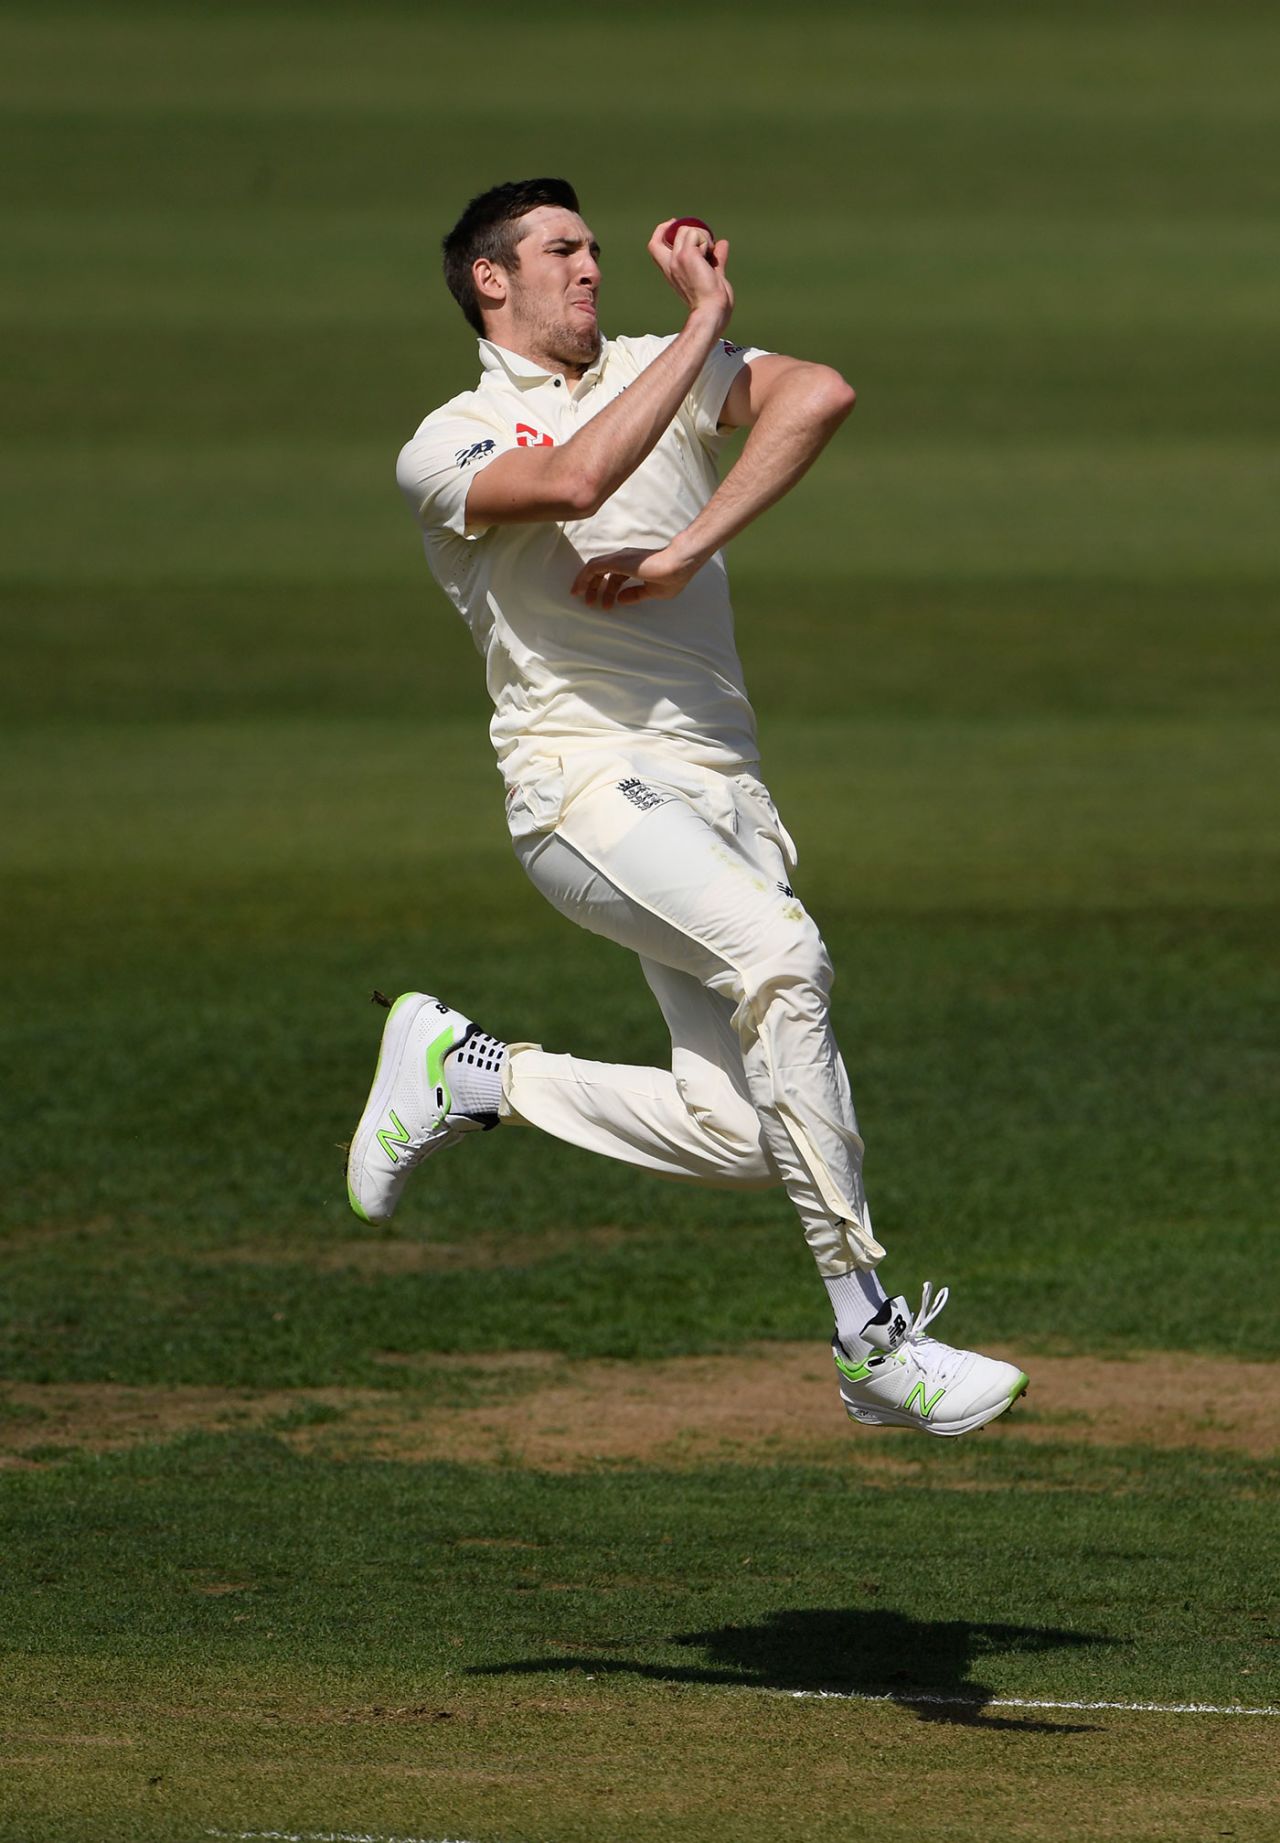 Craig Overton in his delivery stride, New Zealand XI v England XI, Tour match, Hamilton, 1st day, March 16, 2018